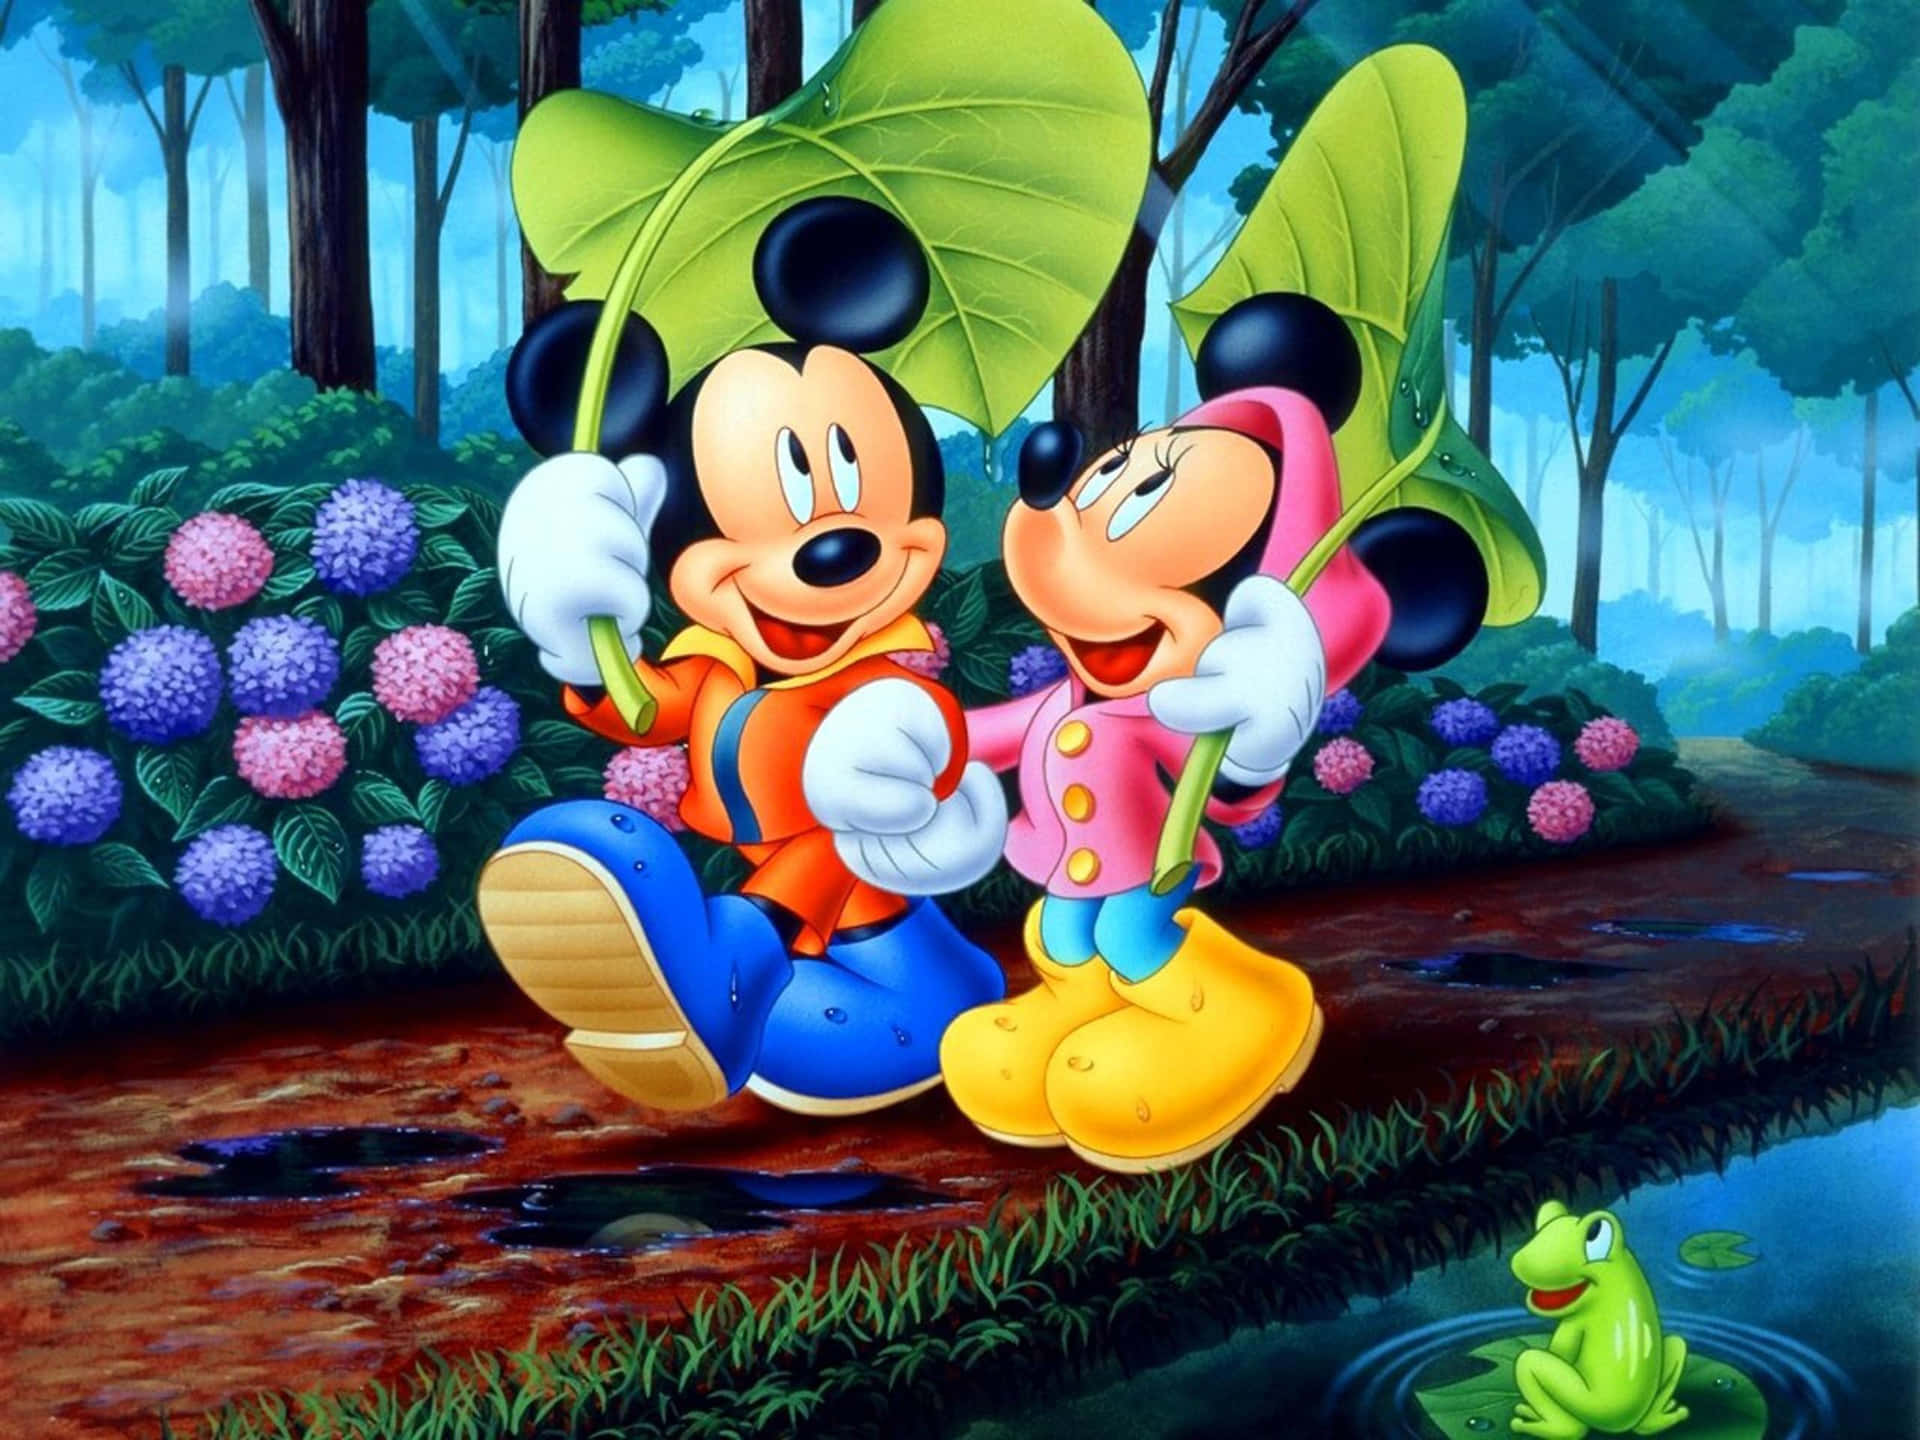 Enjoy the Adventures of Mickey Mouse